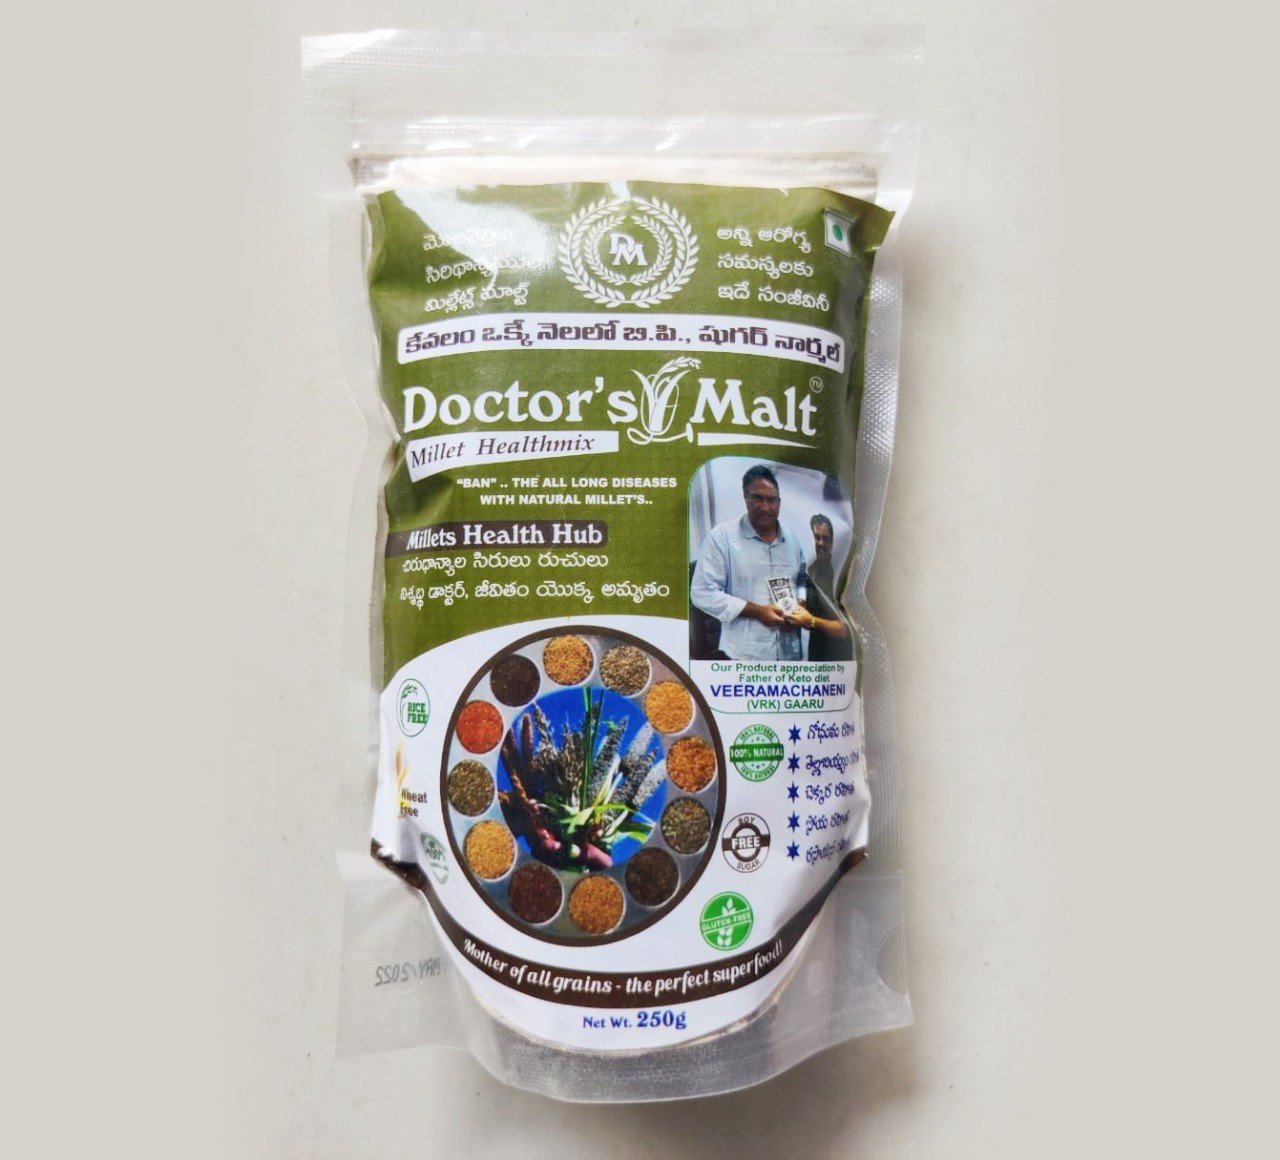 DOCTORS MALT 100% NATURAL ORGANIC millet health mix| All natural millet and multi grains| Pack of 2 (250G each)